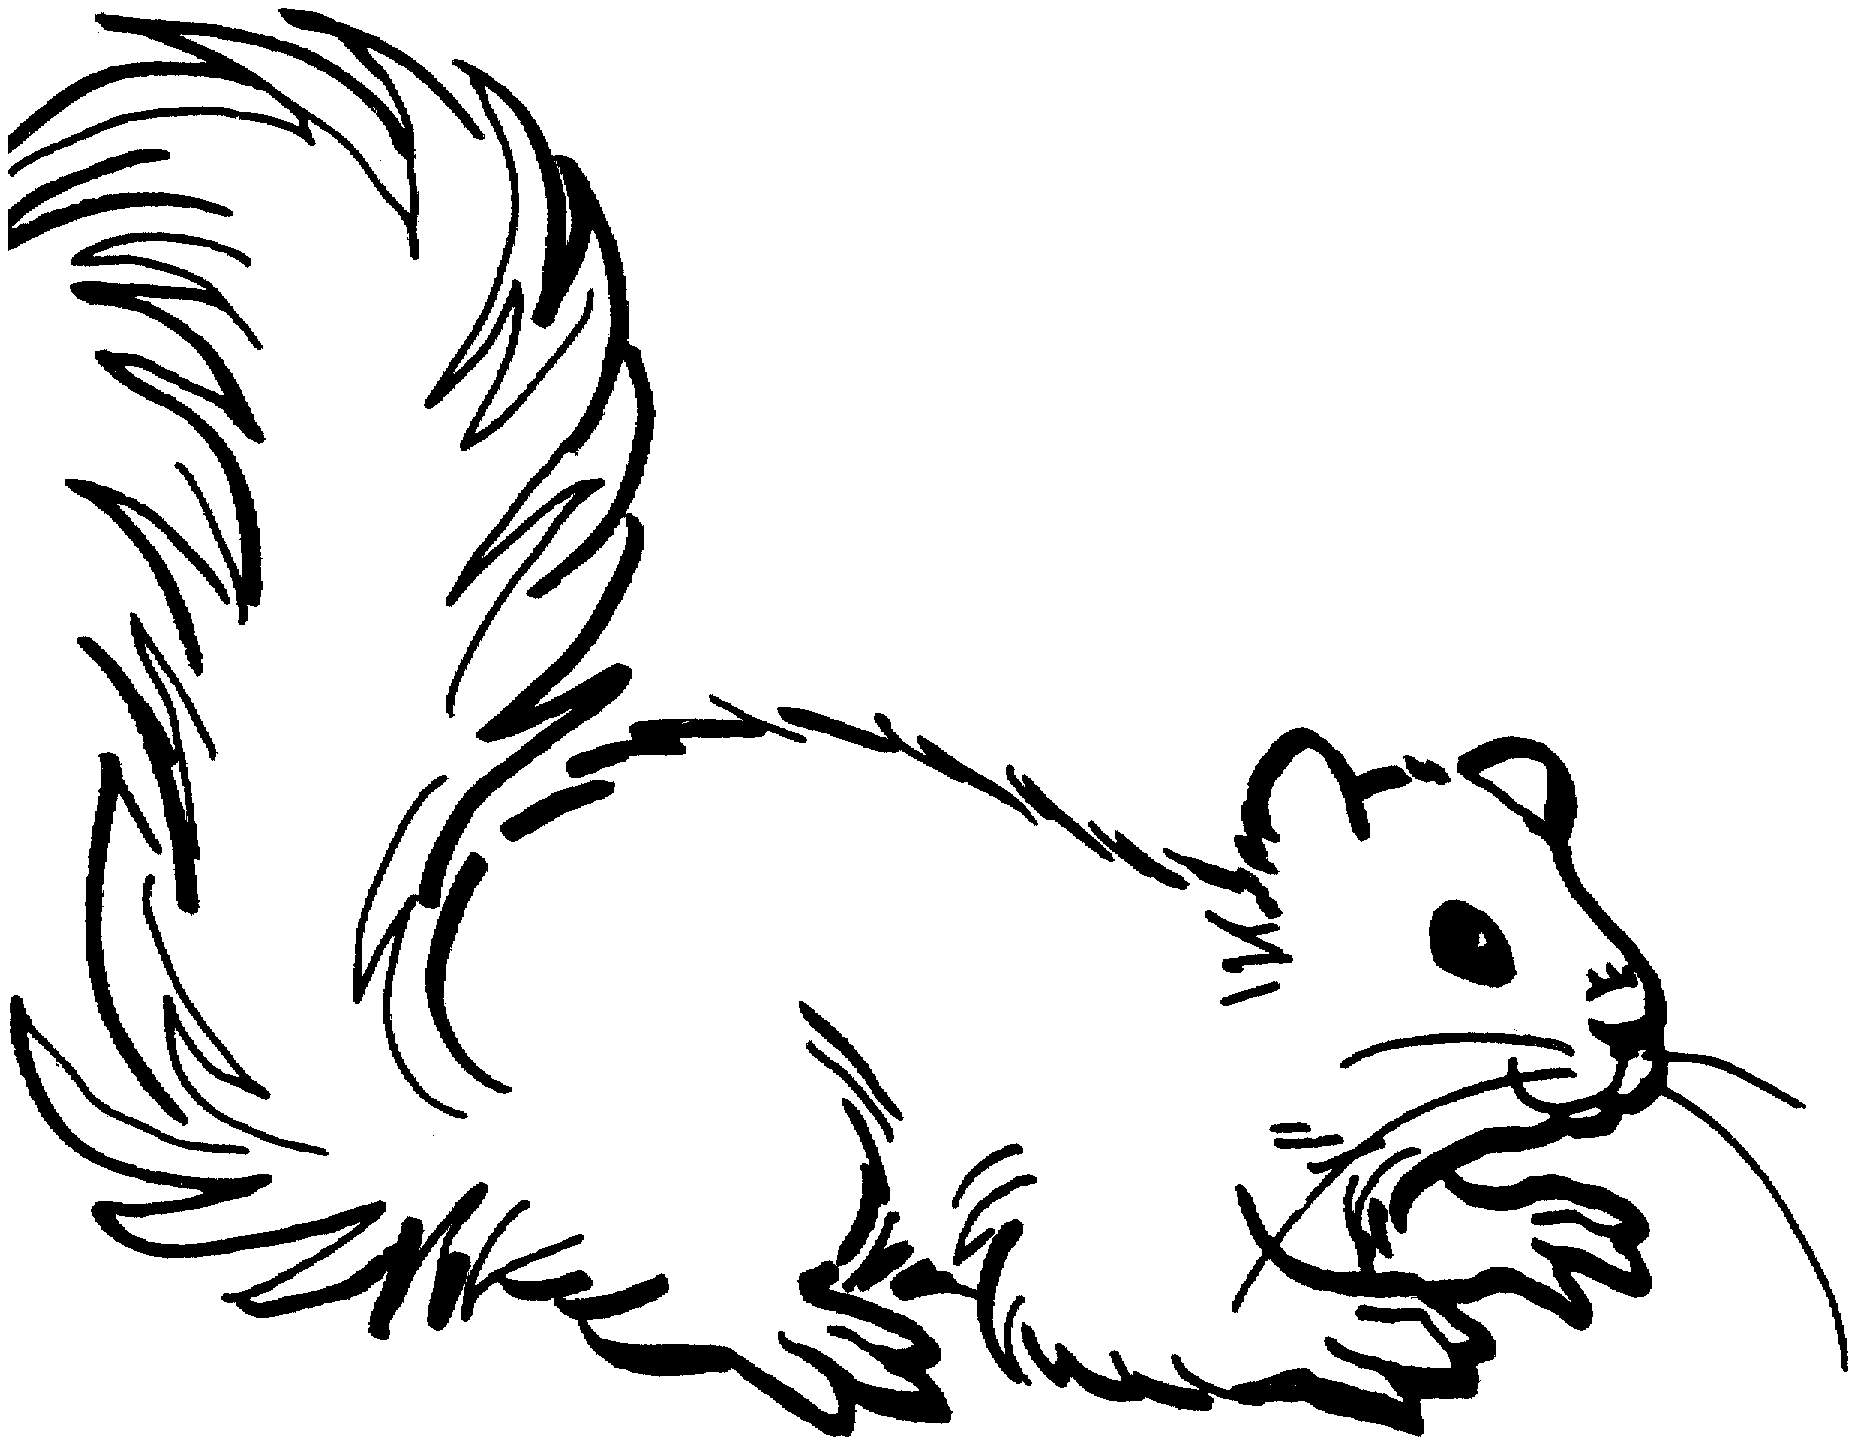 Northern Flying Squirrel Coloring Page Coloring Pages